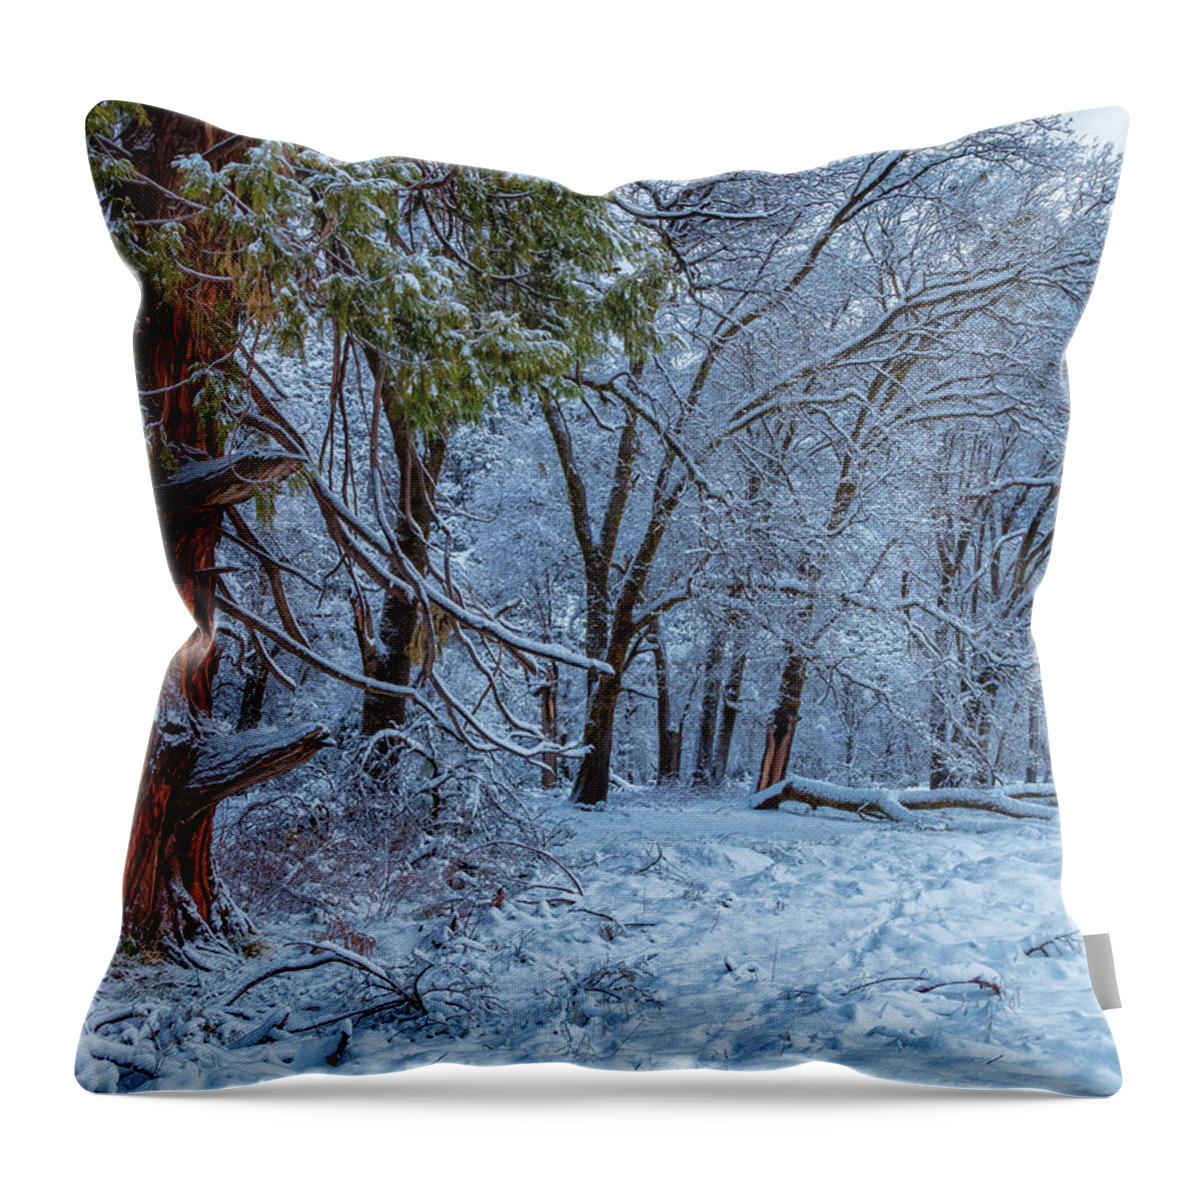 Landscape Throw Pillow featuring the photograph Snow Trees by Jonathan Nguyen